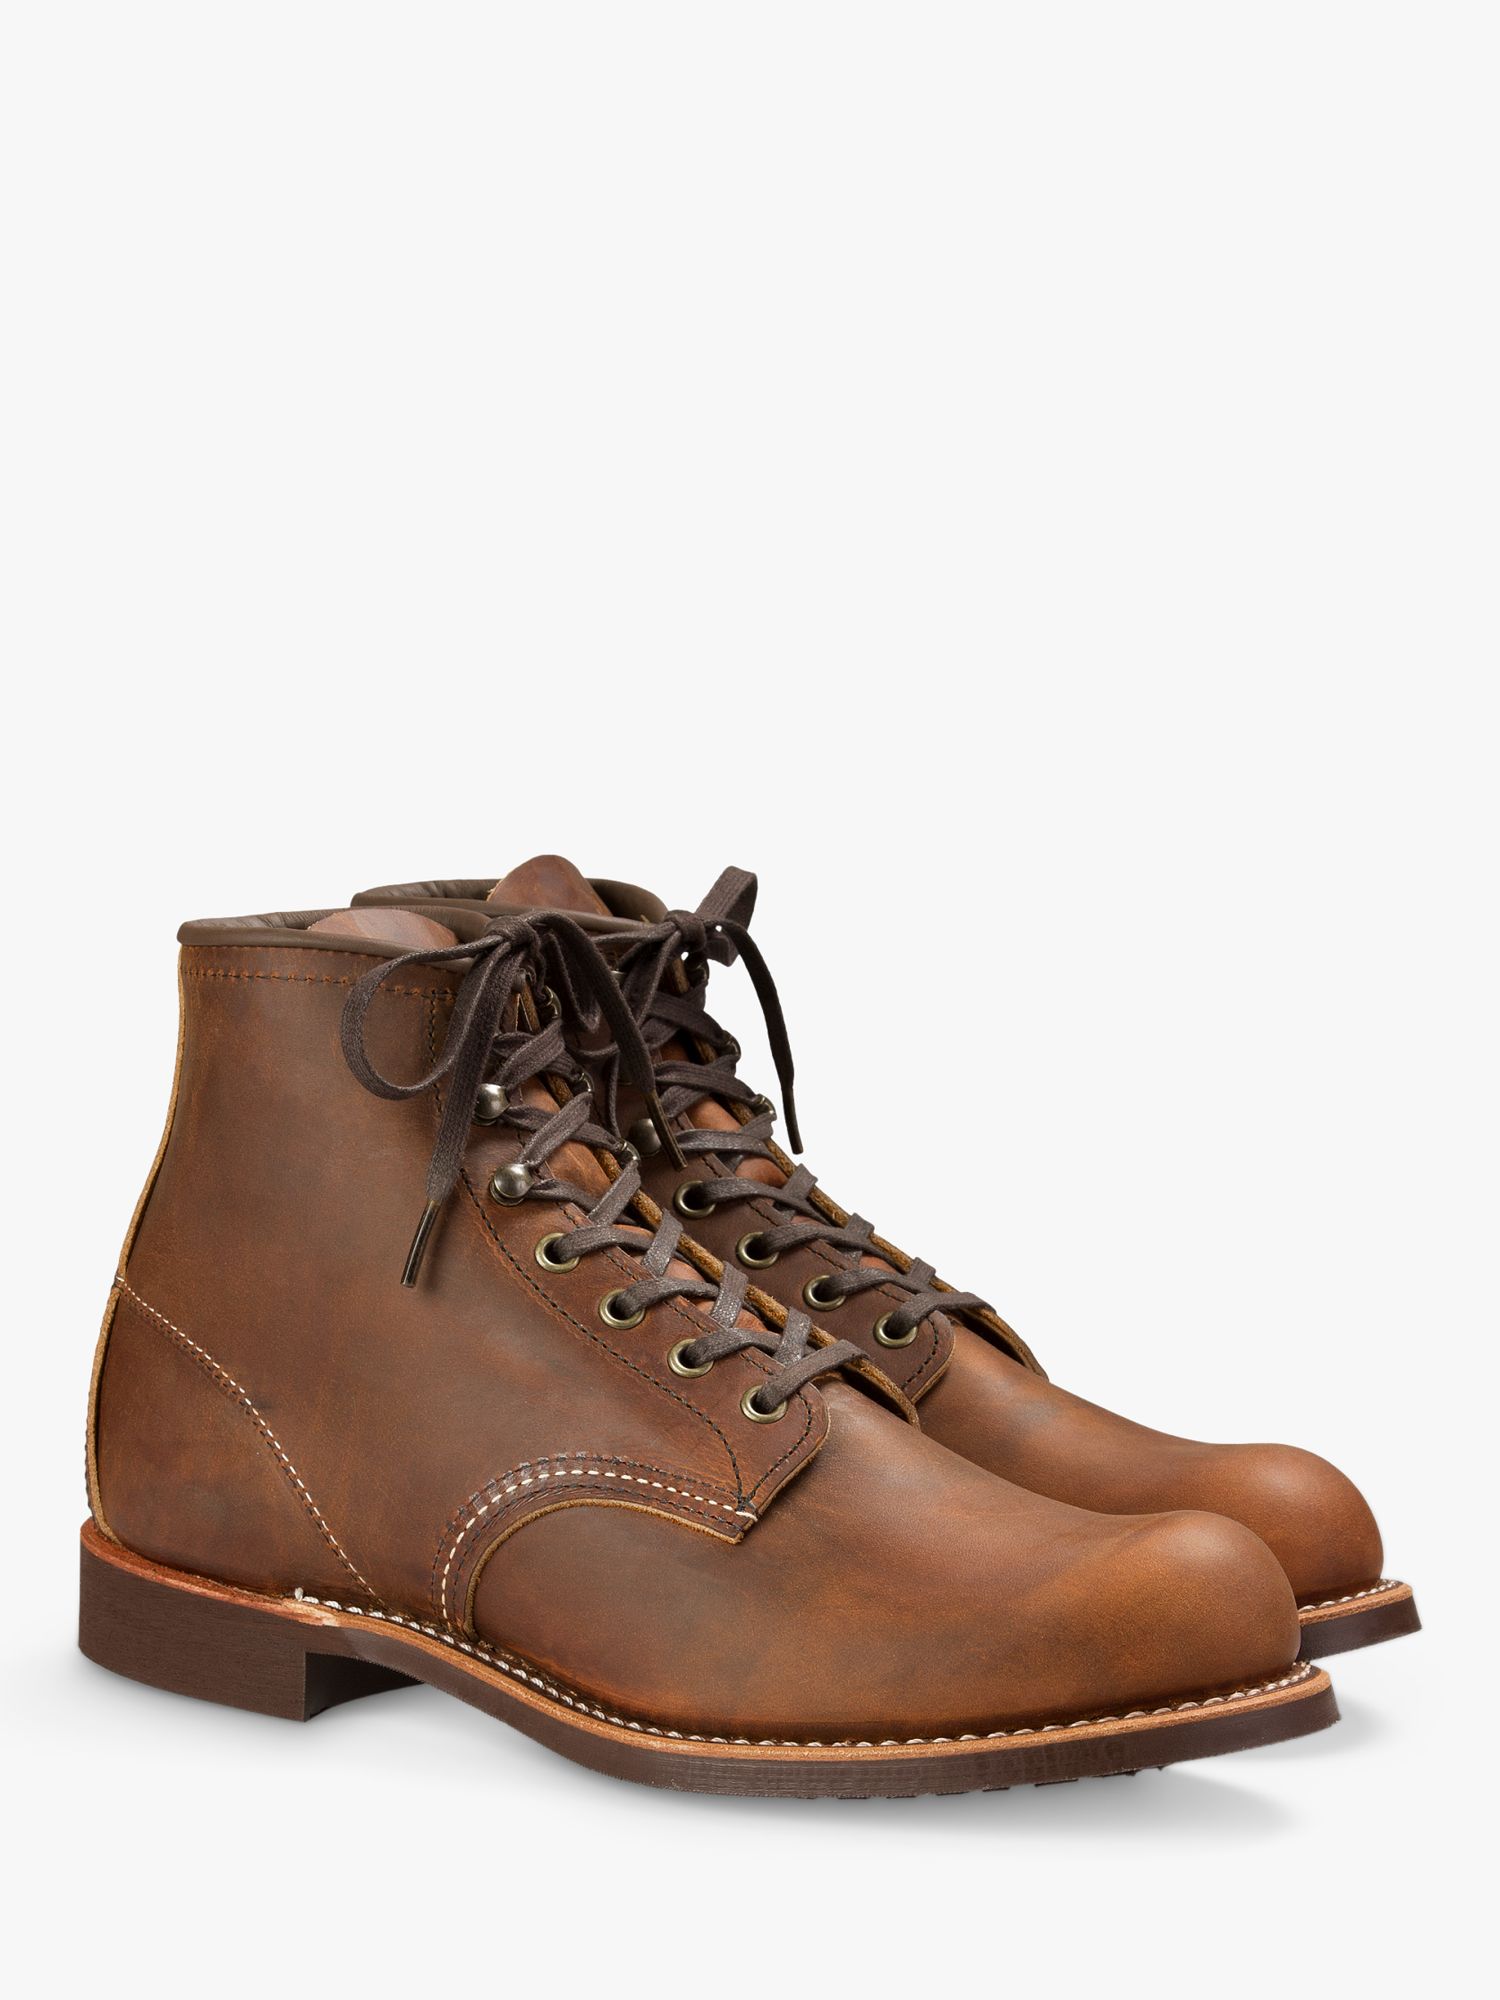 Buy Red Wing Blacksmith Leather Lace-Up Boots, Copper Rough & Tuff Online at johnlewis.com